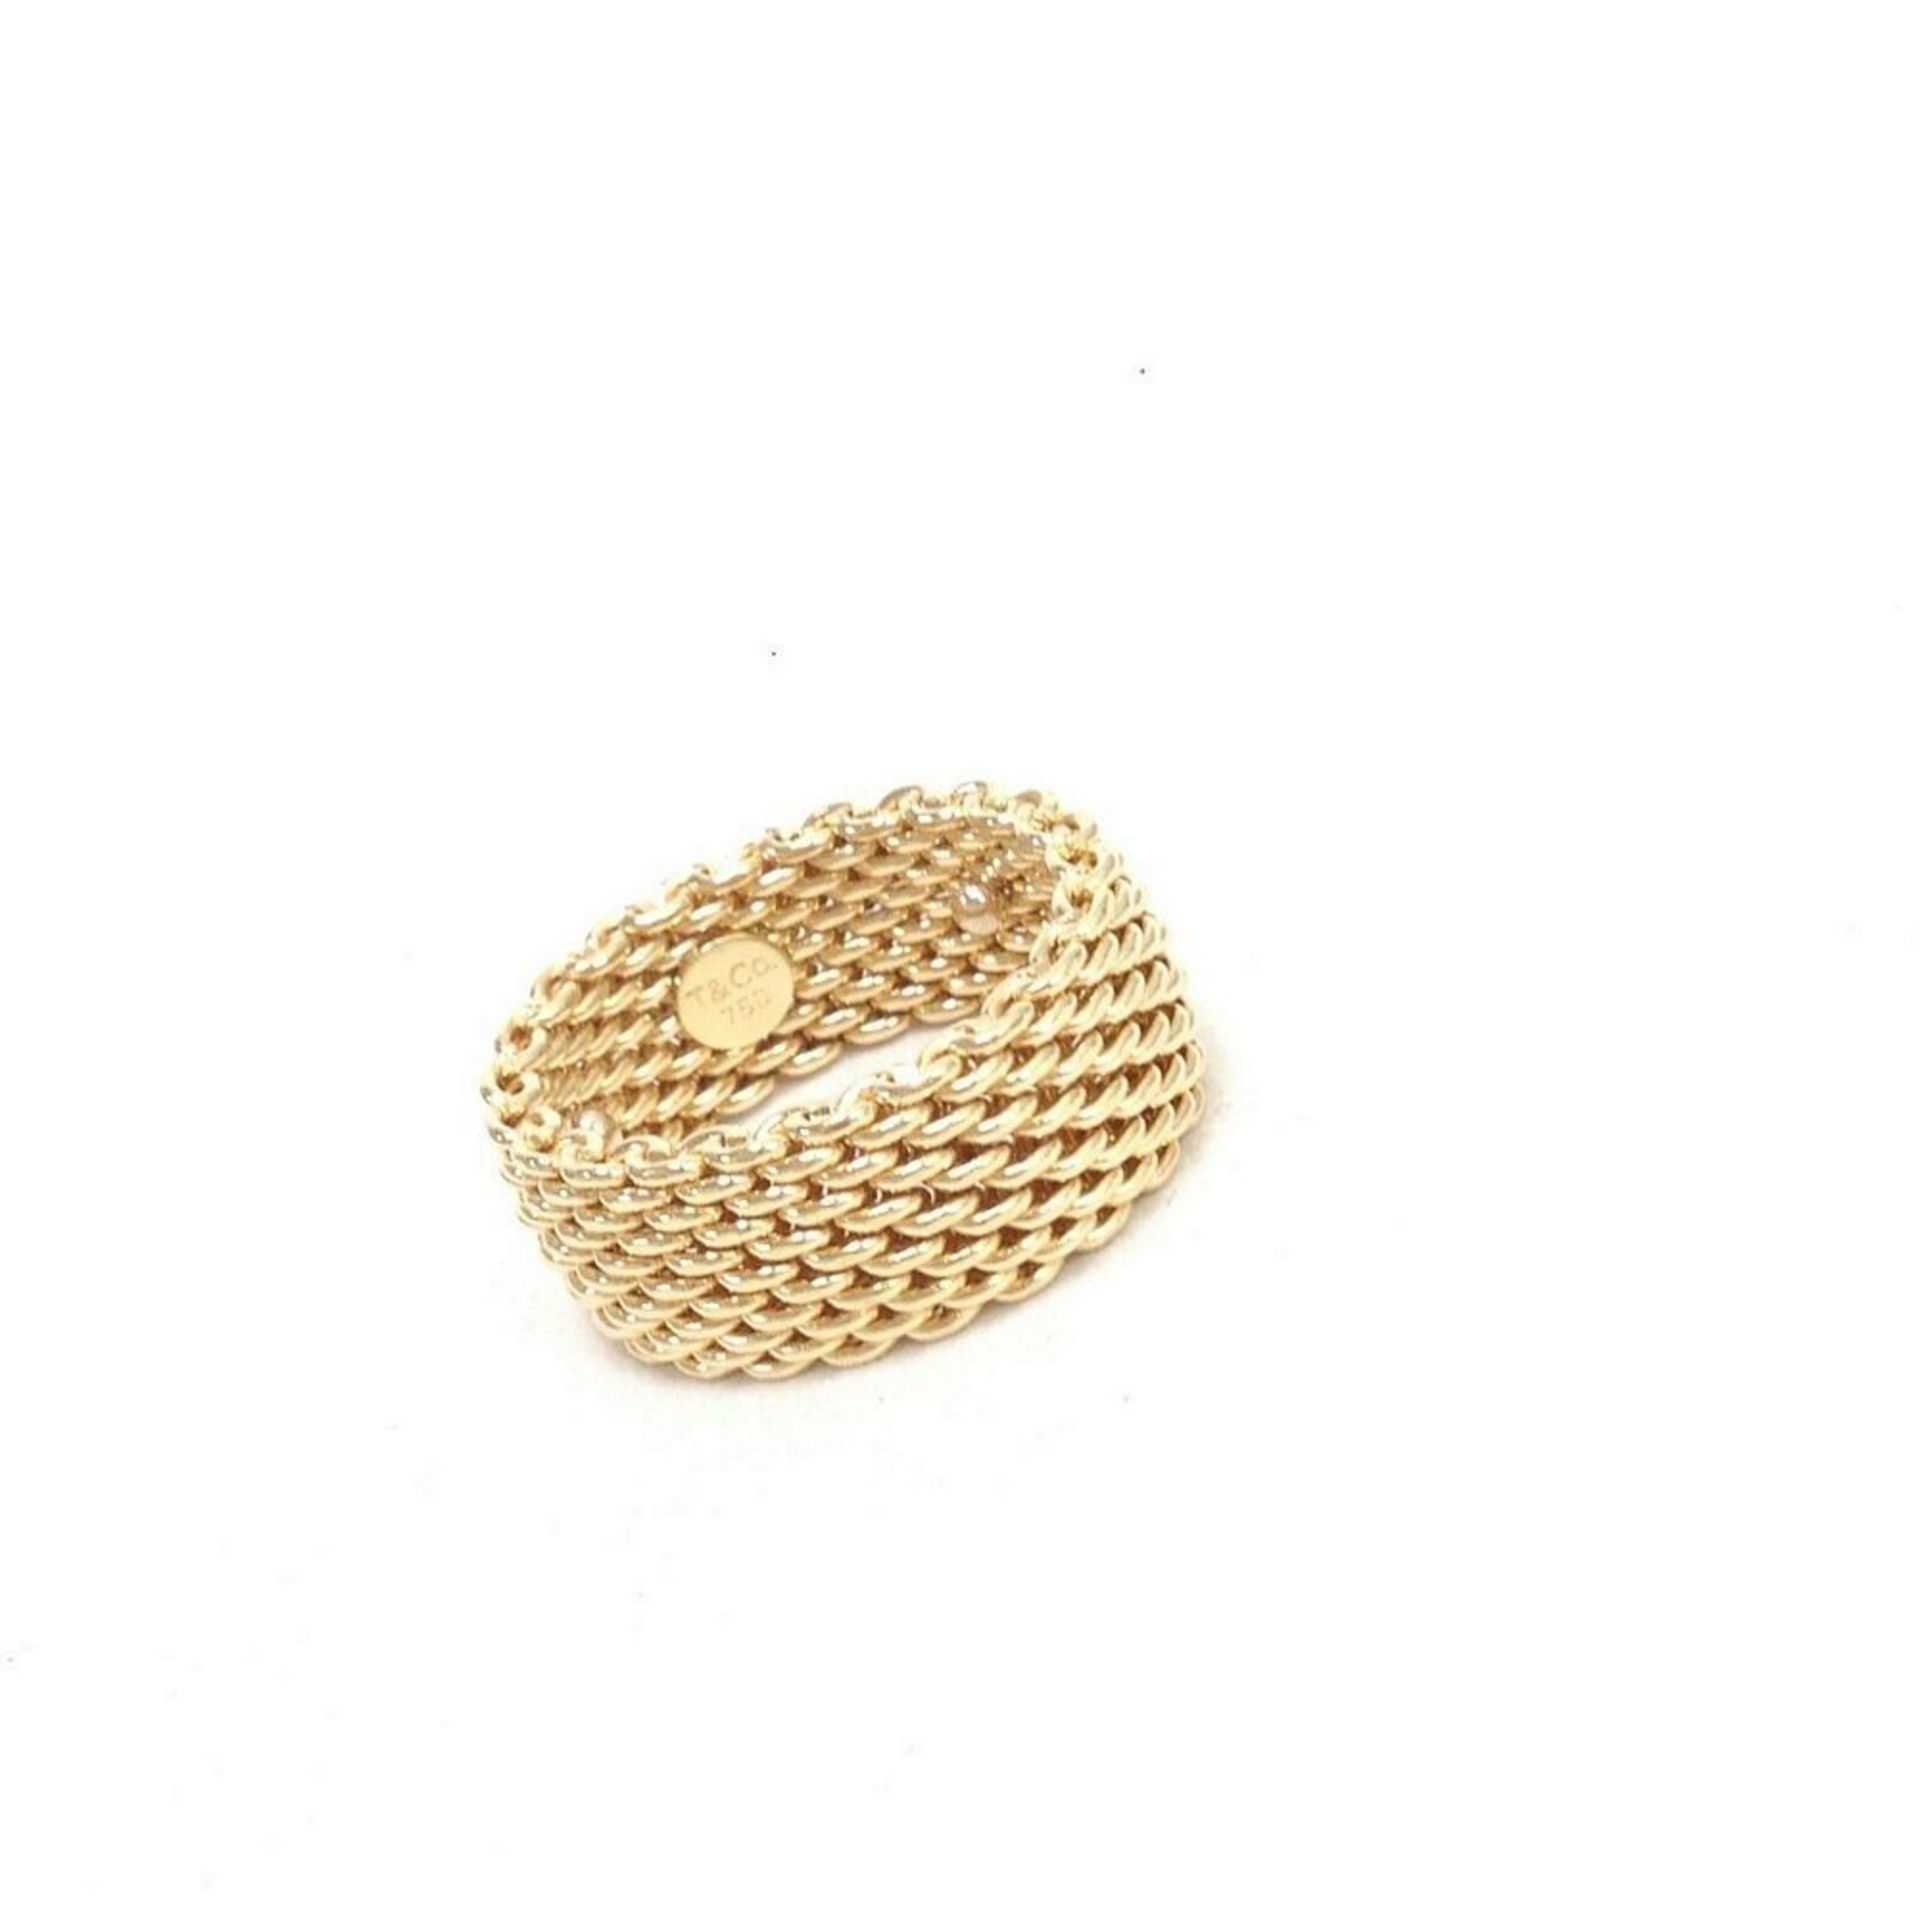 Tiffany & Co Somerset 18K Yellow Gold Mesh Pattern Band Ring, 9.8mm 14.6 Grams, Size 7.5 - Image 2 of 4